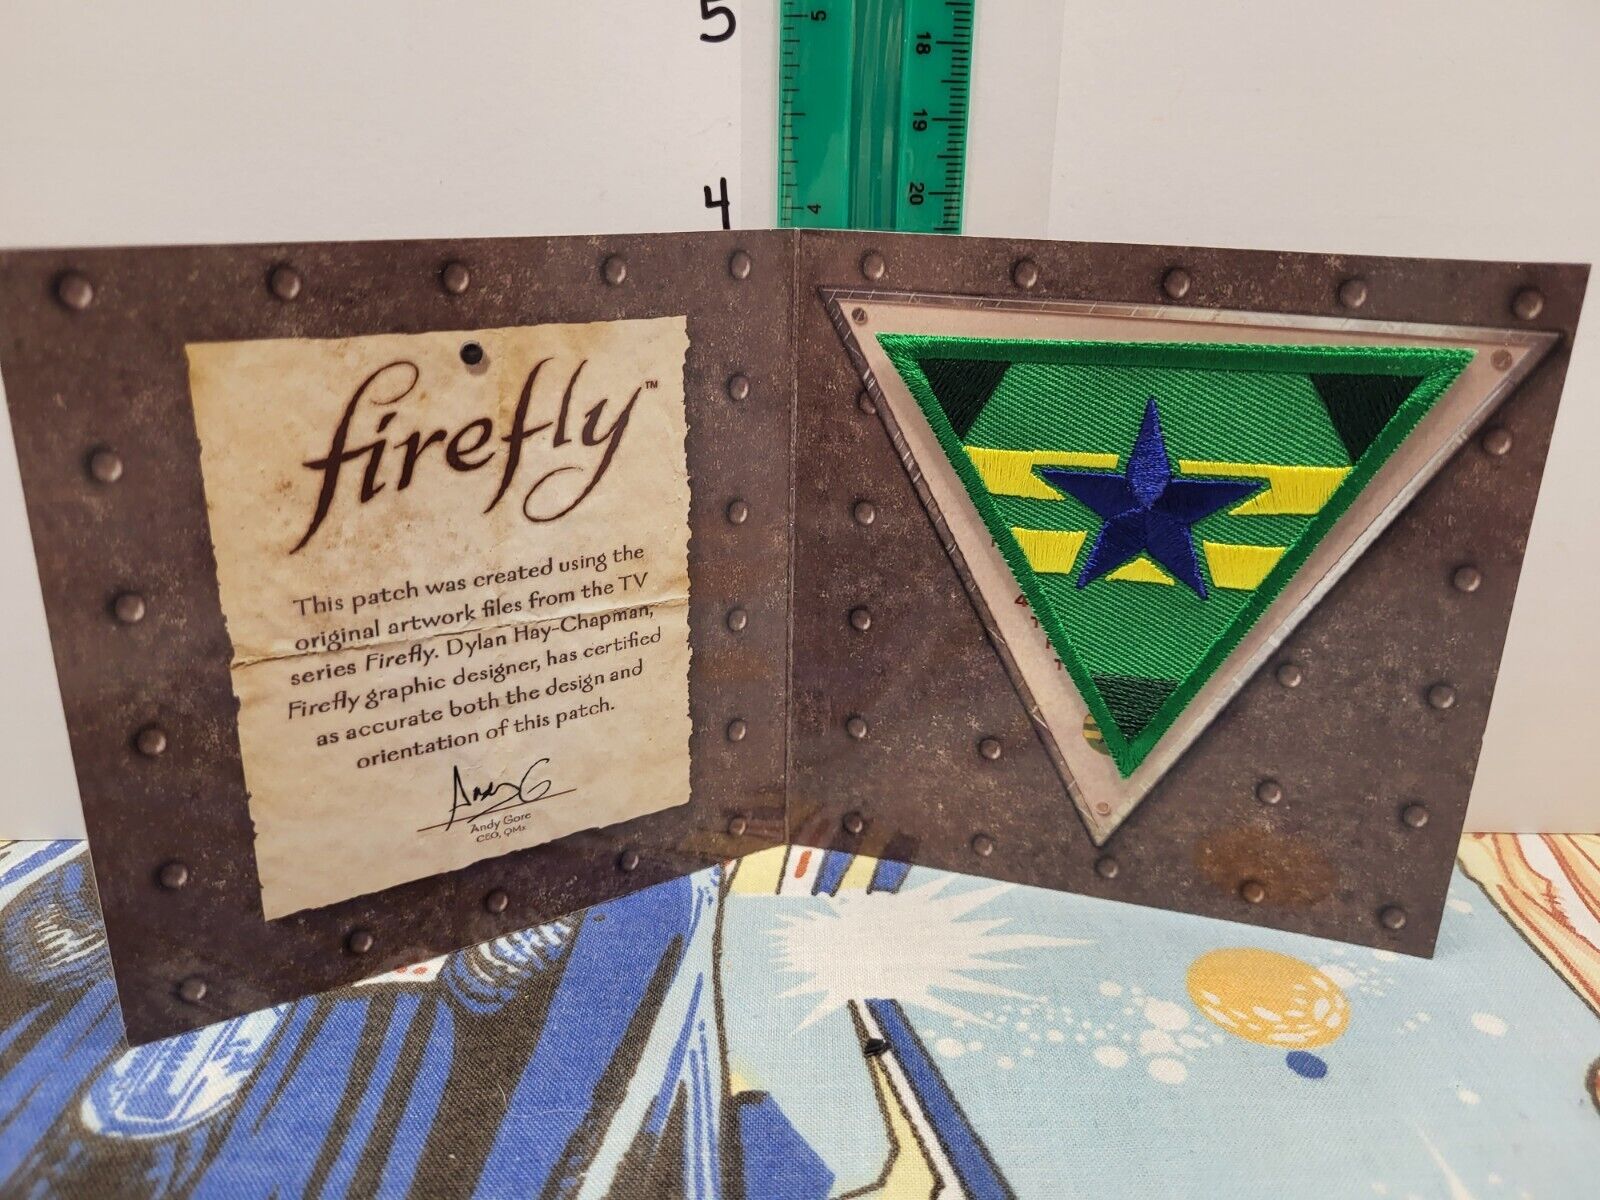 Lootcrate - QMX - Firefly INDEPENDENTS PATCH